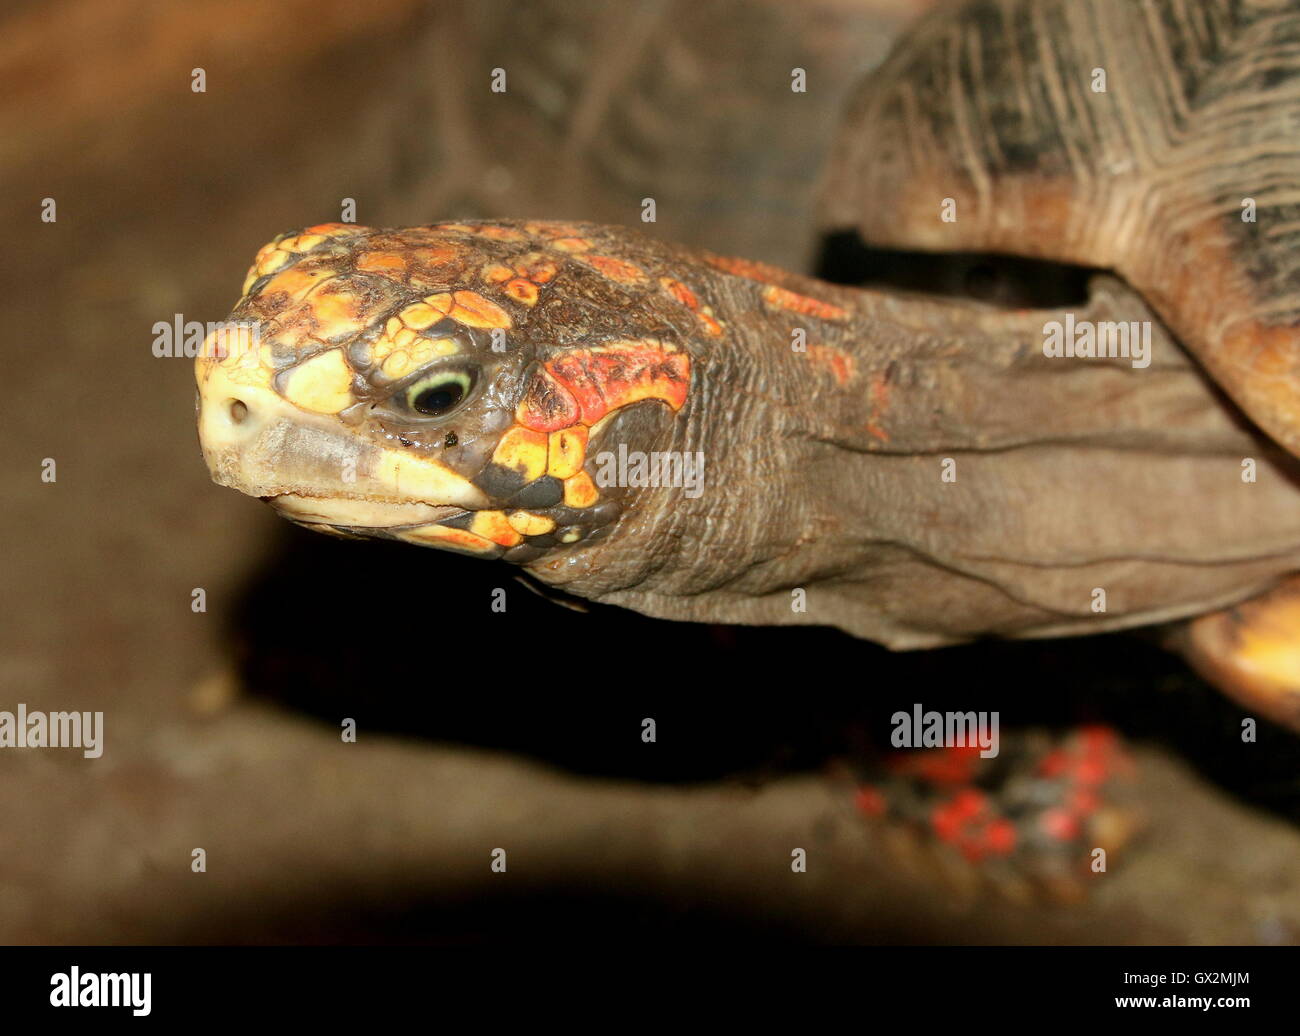 Closeup of the head of a South American Red footed tortoise (Chelonoidis carbonaria) Stock Photo